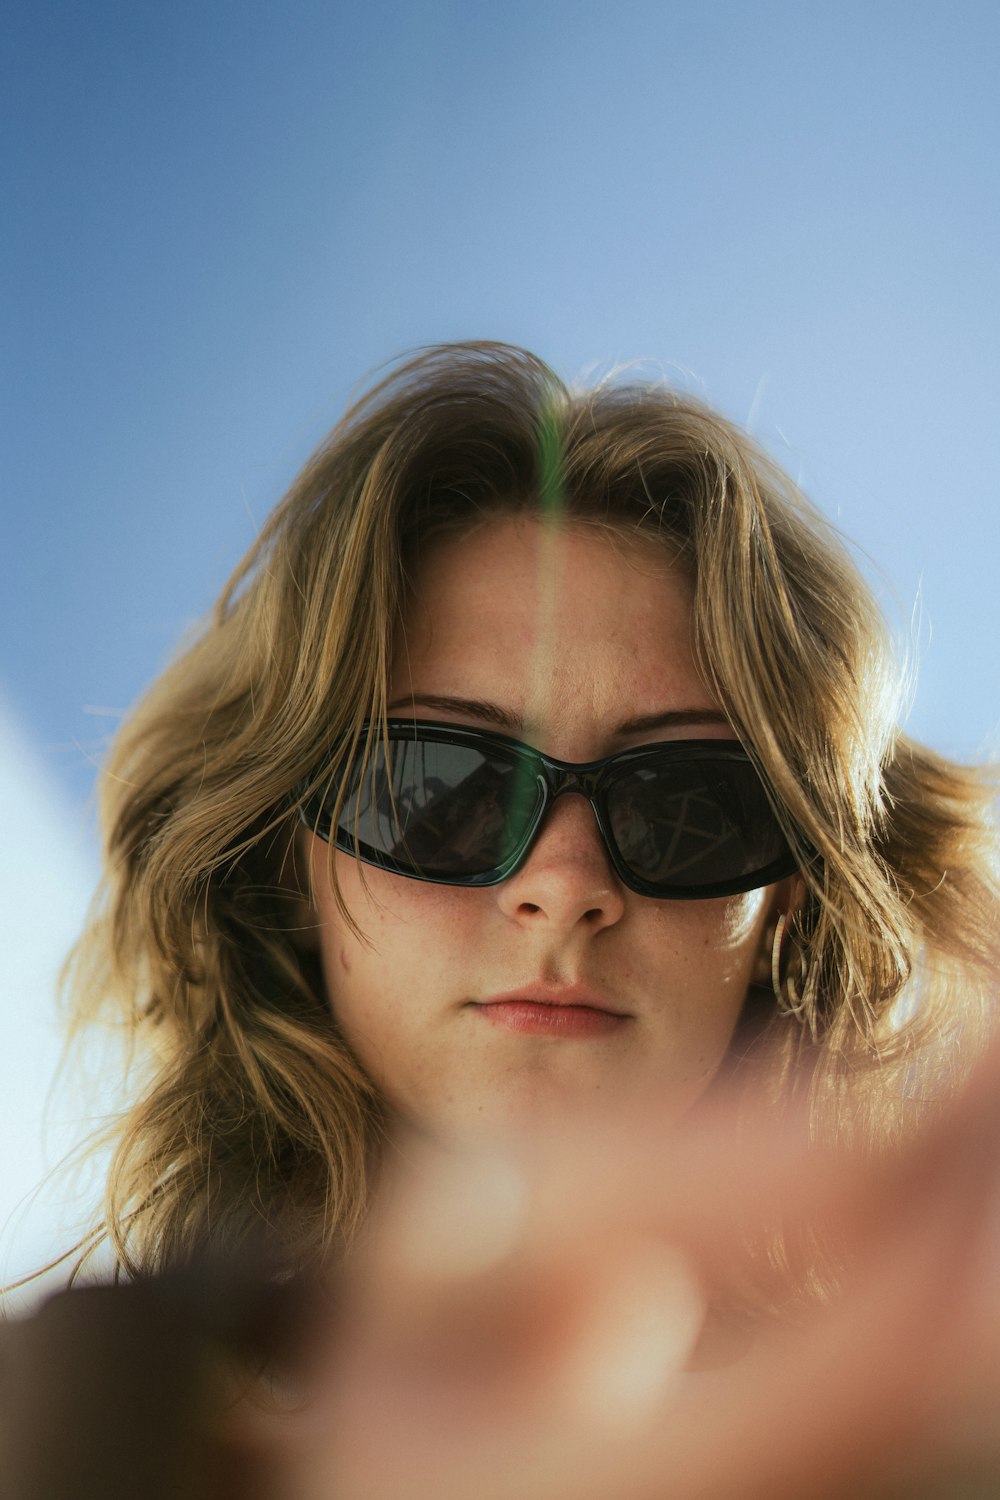 a woman wearing sunglasses looking at her cell phone